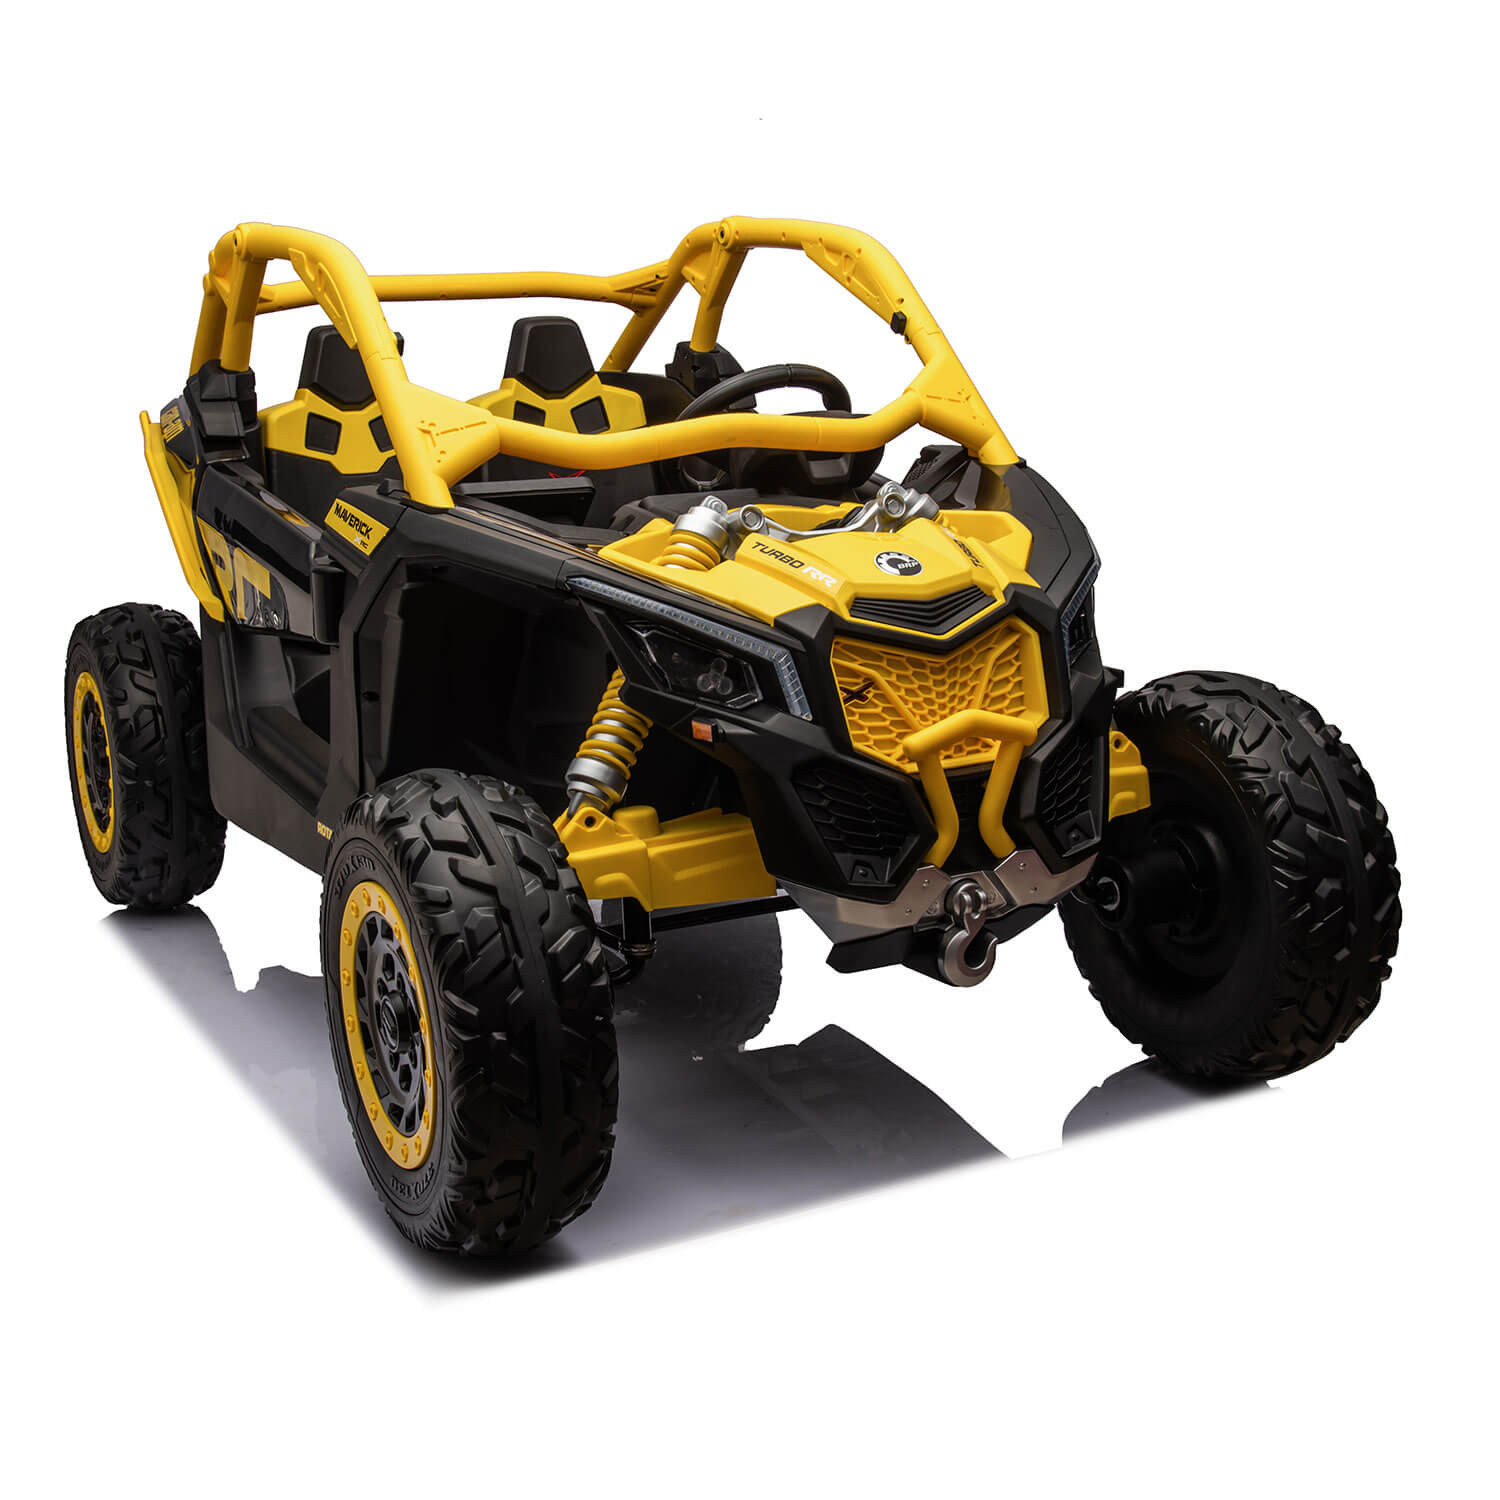 24V Can-Am Maverick X3 Kids Ride-On Buggy - Yellow – Big Toys Direct